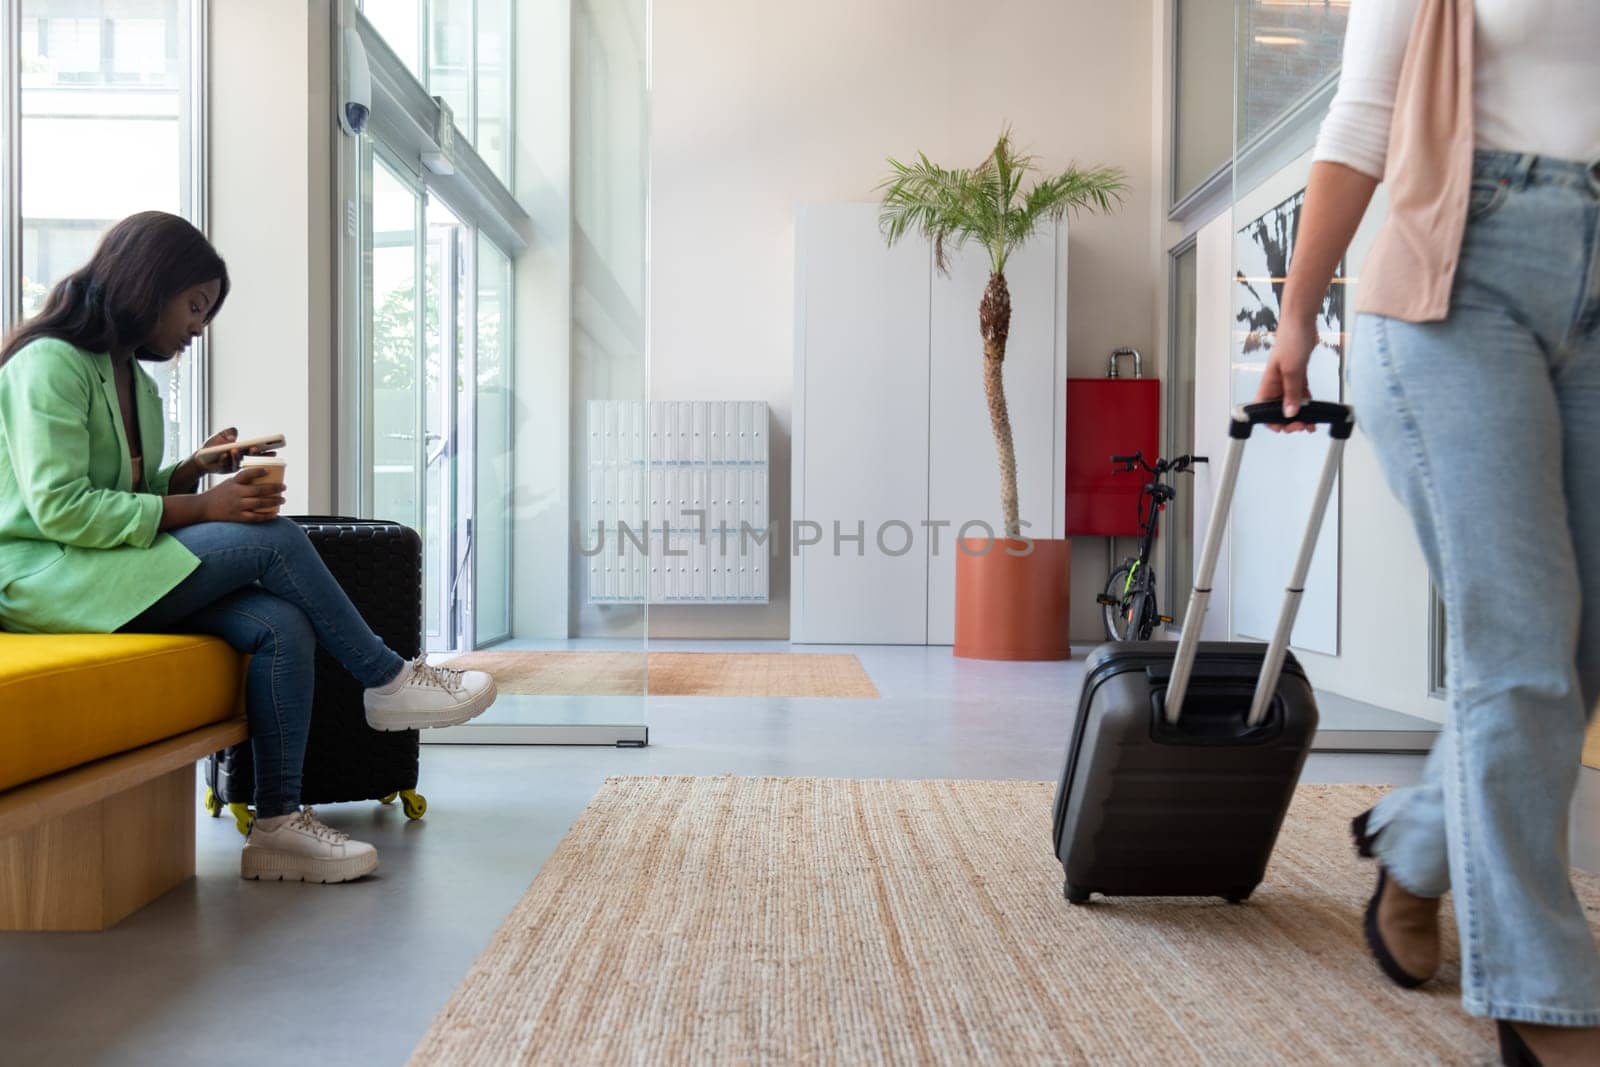 Hotel reception lobby. Female sitting on bench using mobile phone, woman walking by with trolley suitcase. Copy space. Lifestyle concept.